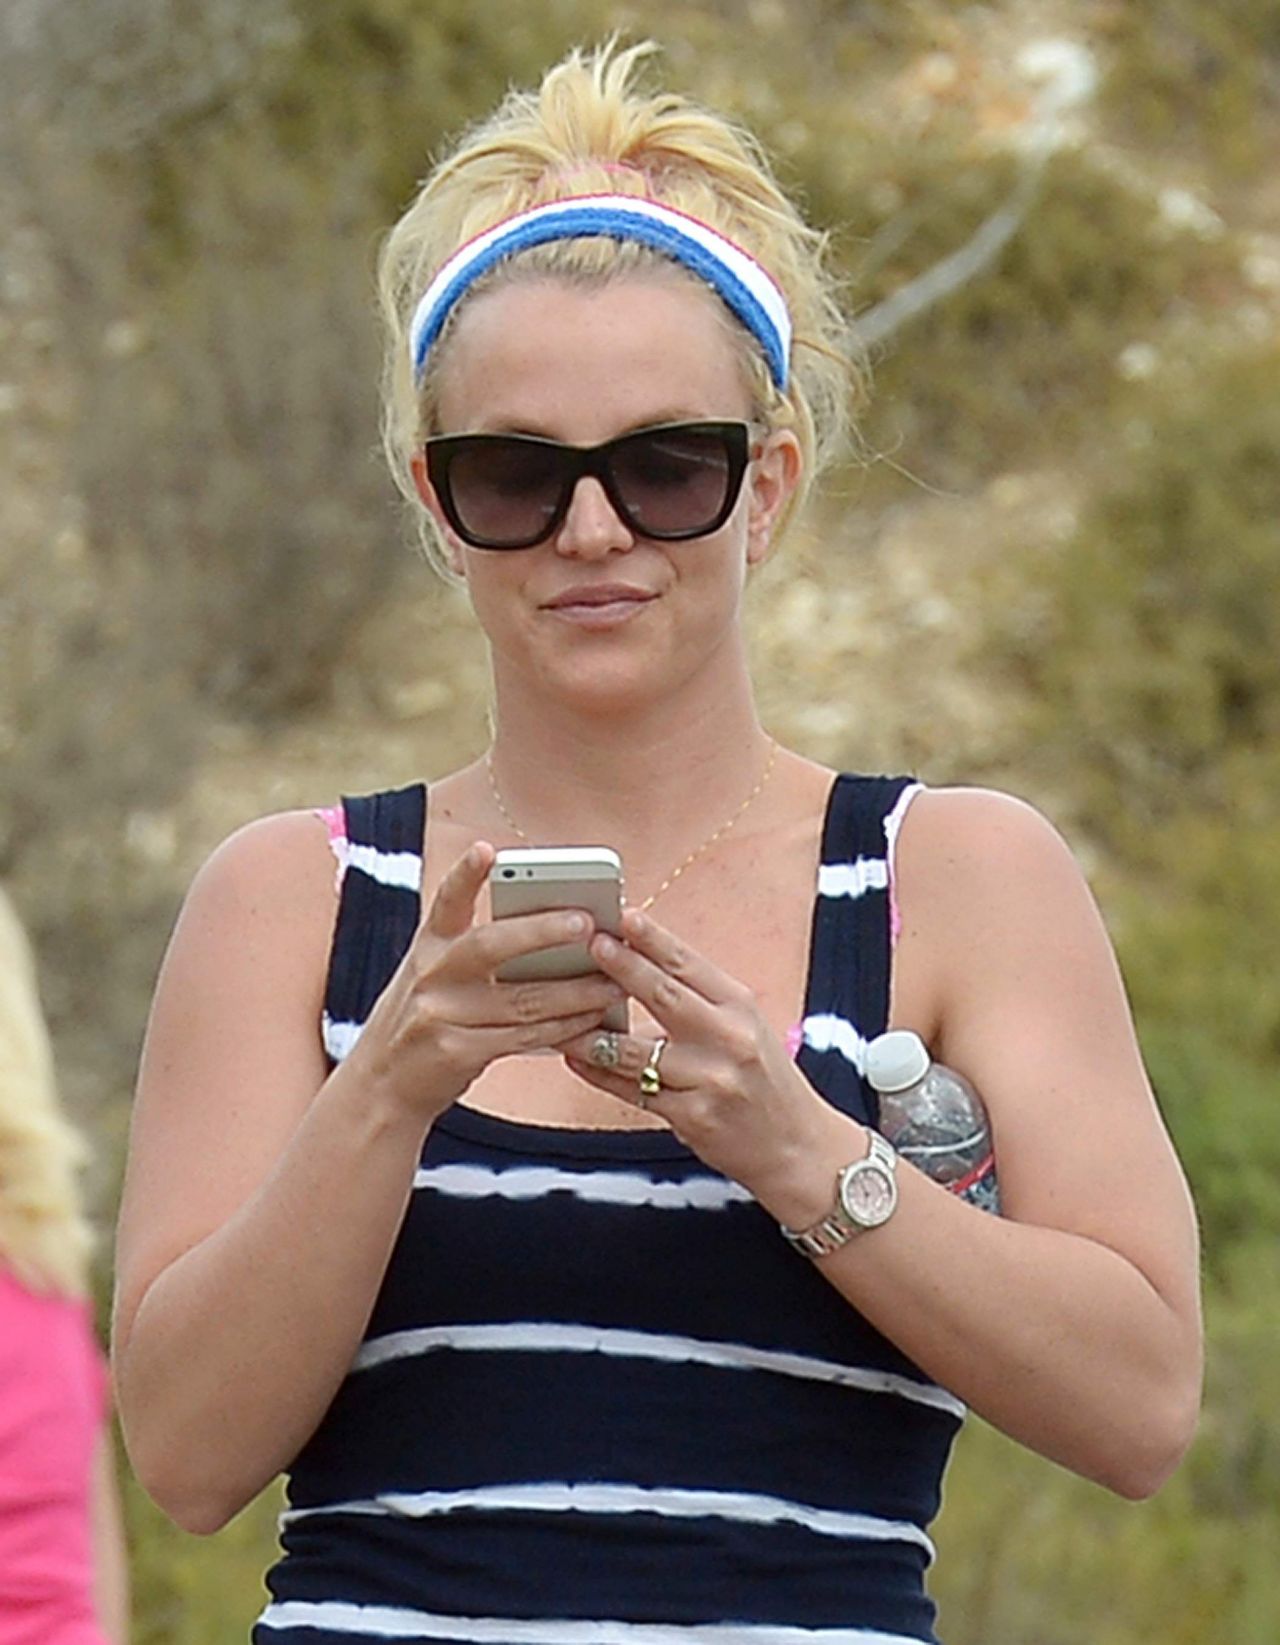 https://celebmafia.com/wp-content/uploads/2015/07/britney-spears-out-about-in-thousand-oaks-july-2015_8.jpg